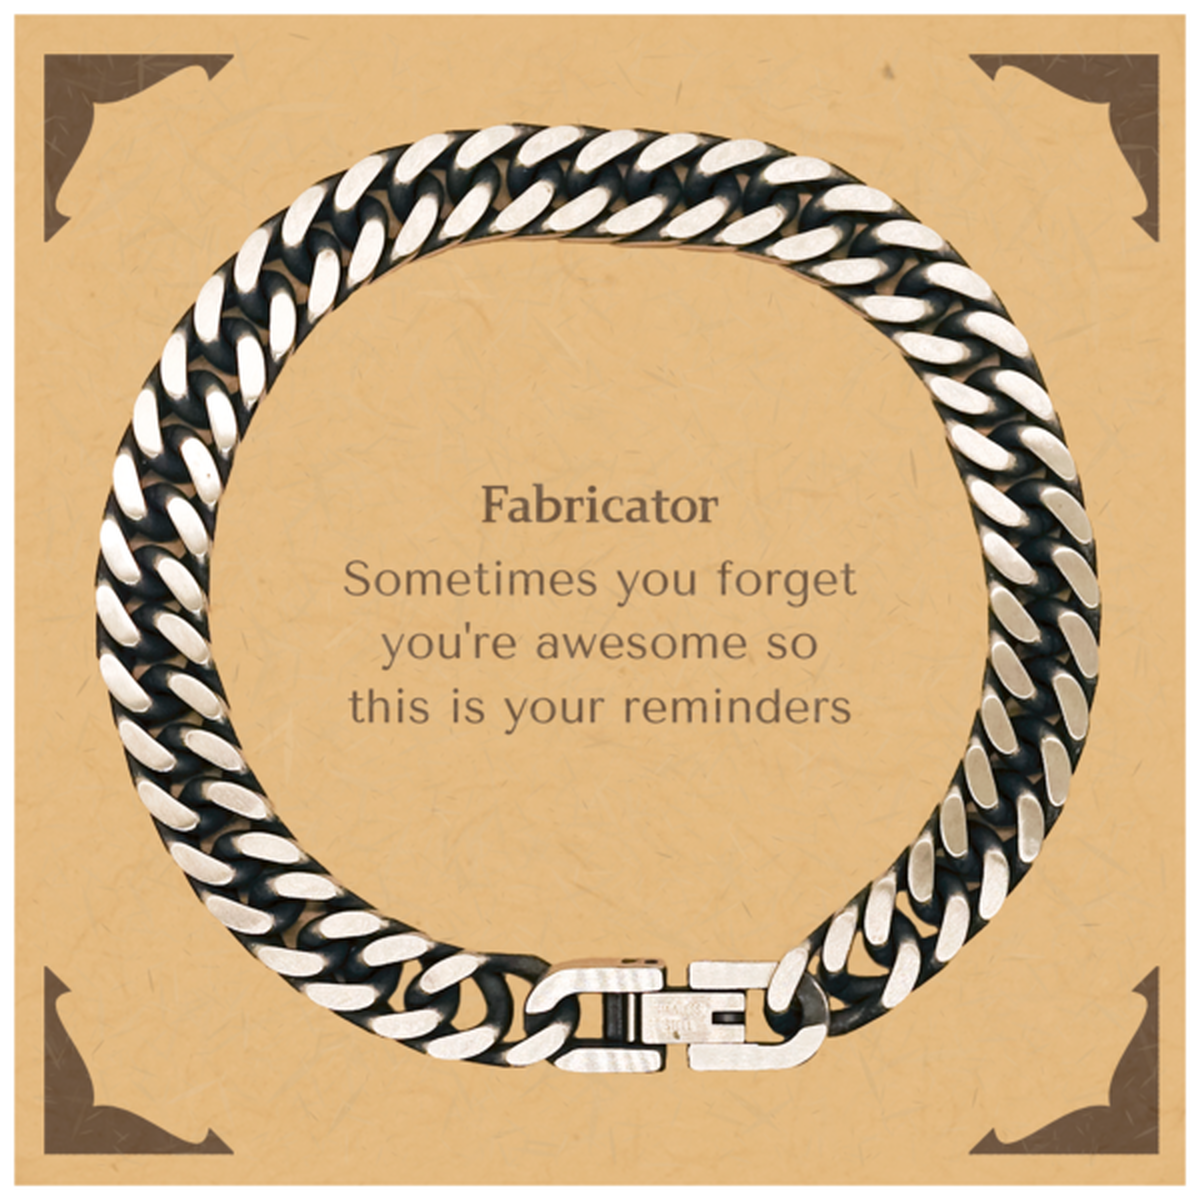 Sentimental Fabricator Cuban Link Chain Bracelet, Fabricator Sometimes you forget you're awesome so this is your reminders, Graduation Christmas Birthday Gifts for Fabricator, Men, Women, Coworkers